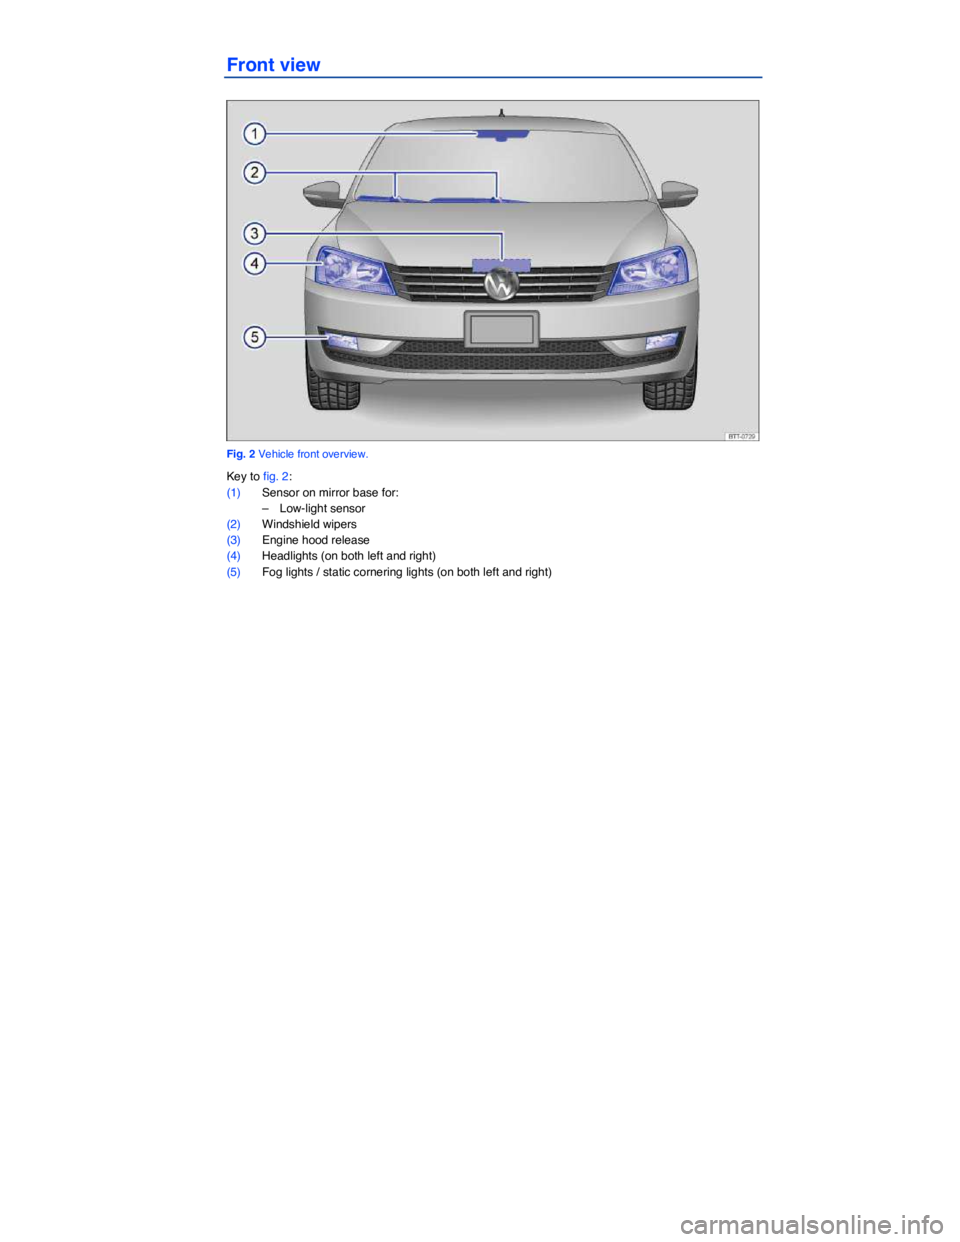 VOLKSWAGEN PASSAT 2009  Owners Manual  
Front view 
 
Fig. 2 Vehicle front overview. 
Key to fig. 2: 
(1) Sensor on mirror base for: 
–  Low-light sensor  
(2) Windshield wipers  
(3) Engine hood release  
(4) Headlights (on both left a